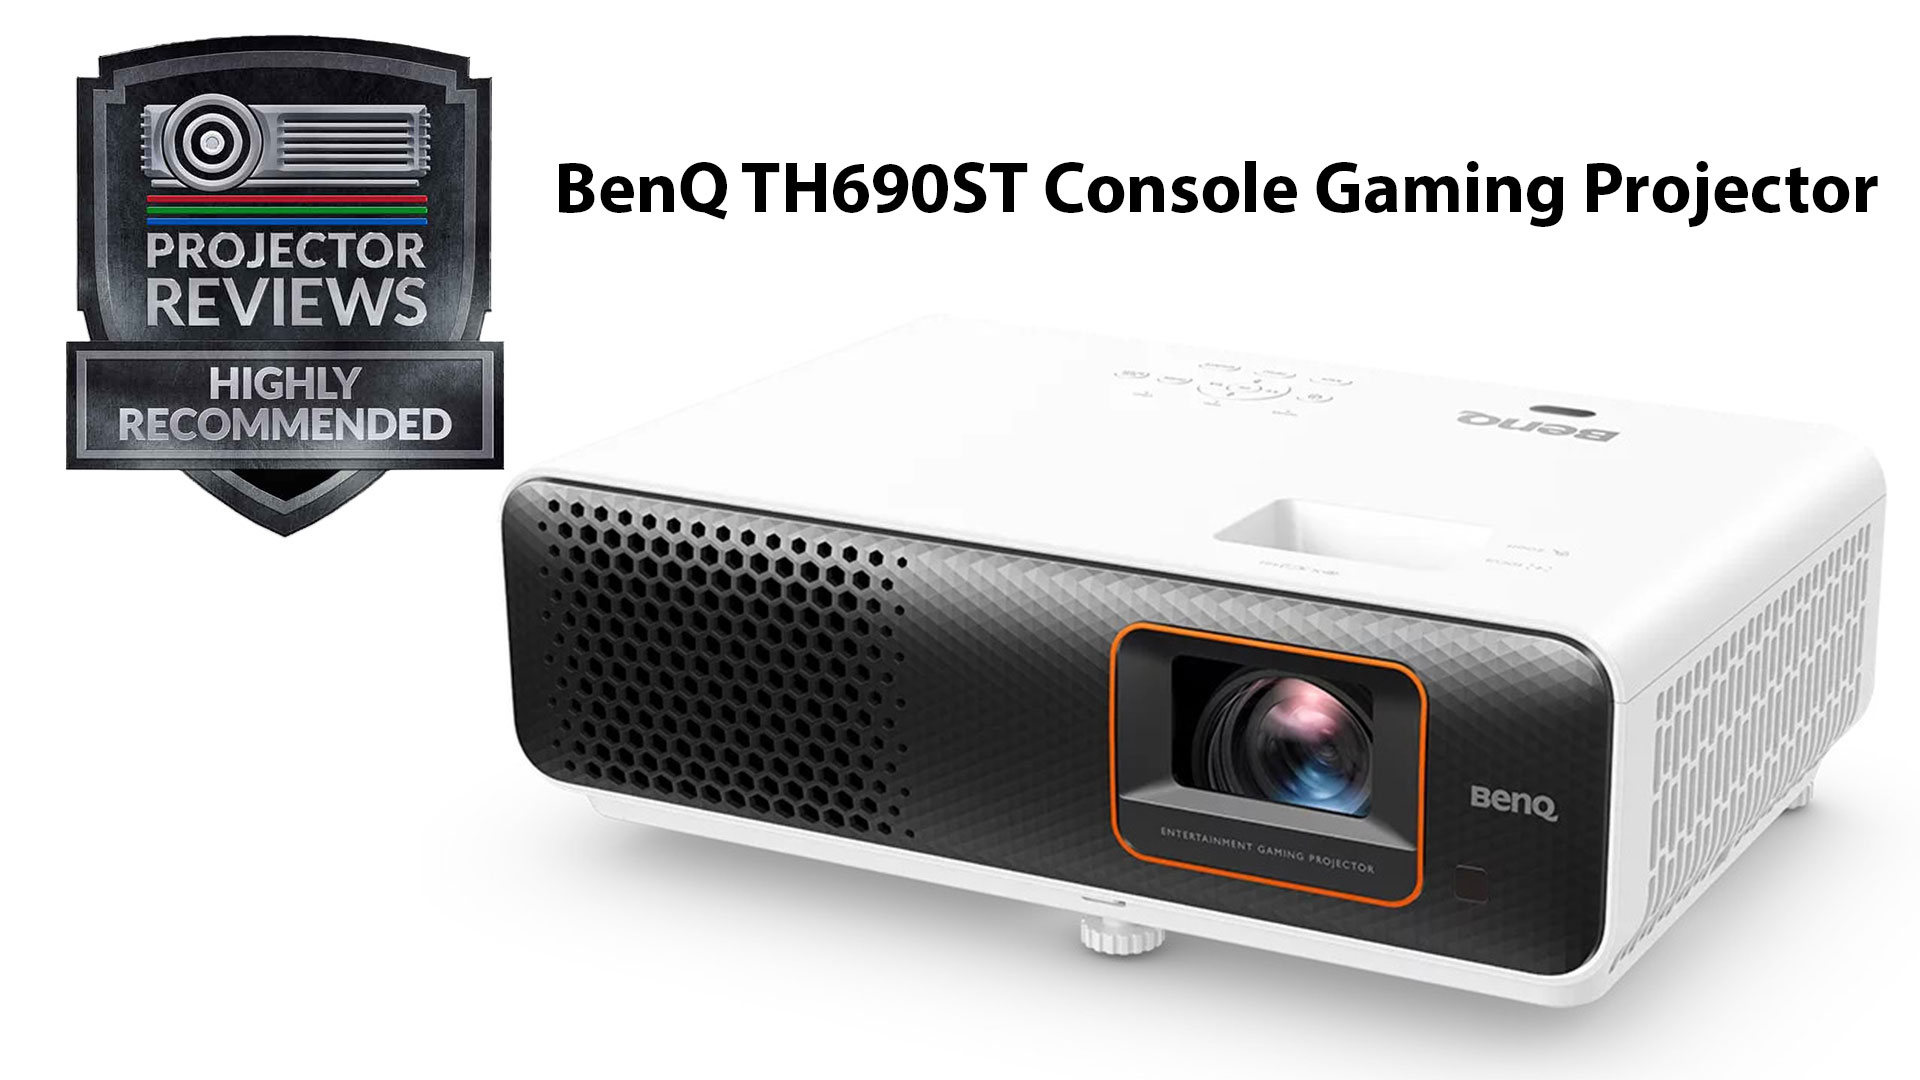 BenQ TH690ST front slanted view with badge.